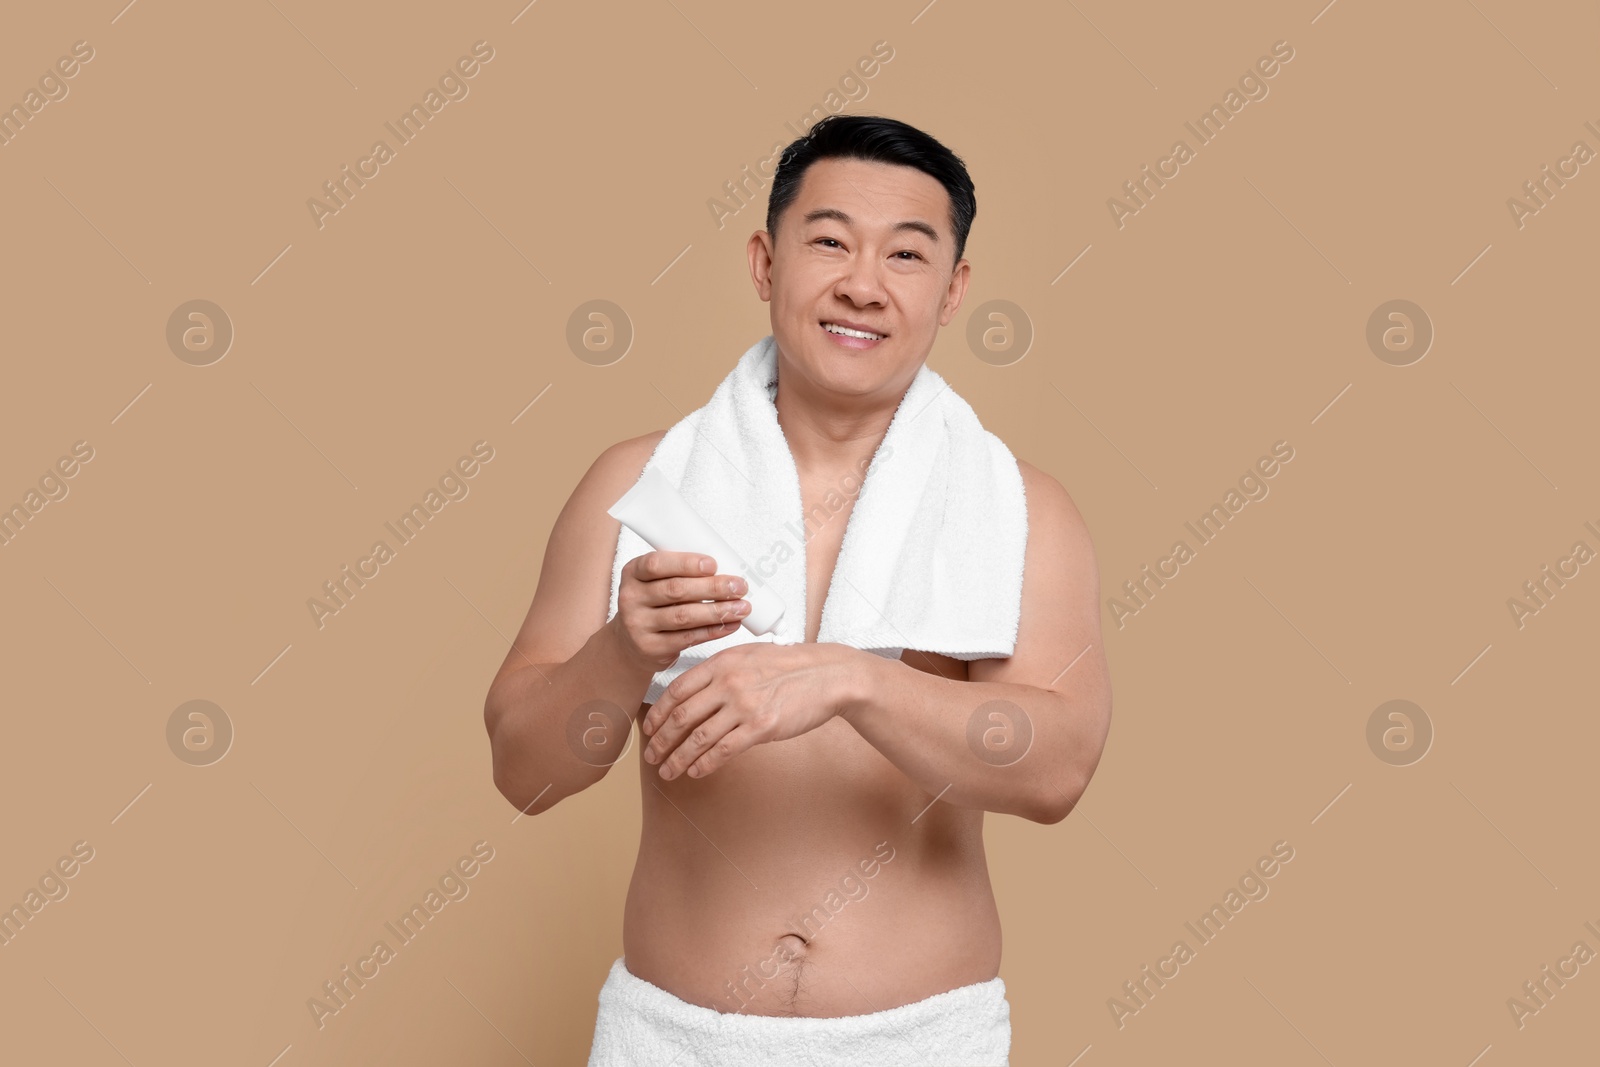 Photo of Man applying body cream onto his hand against light brown background